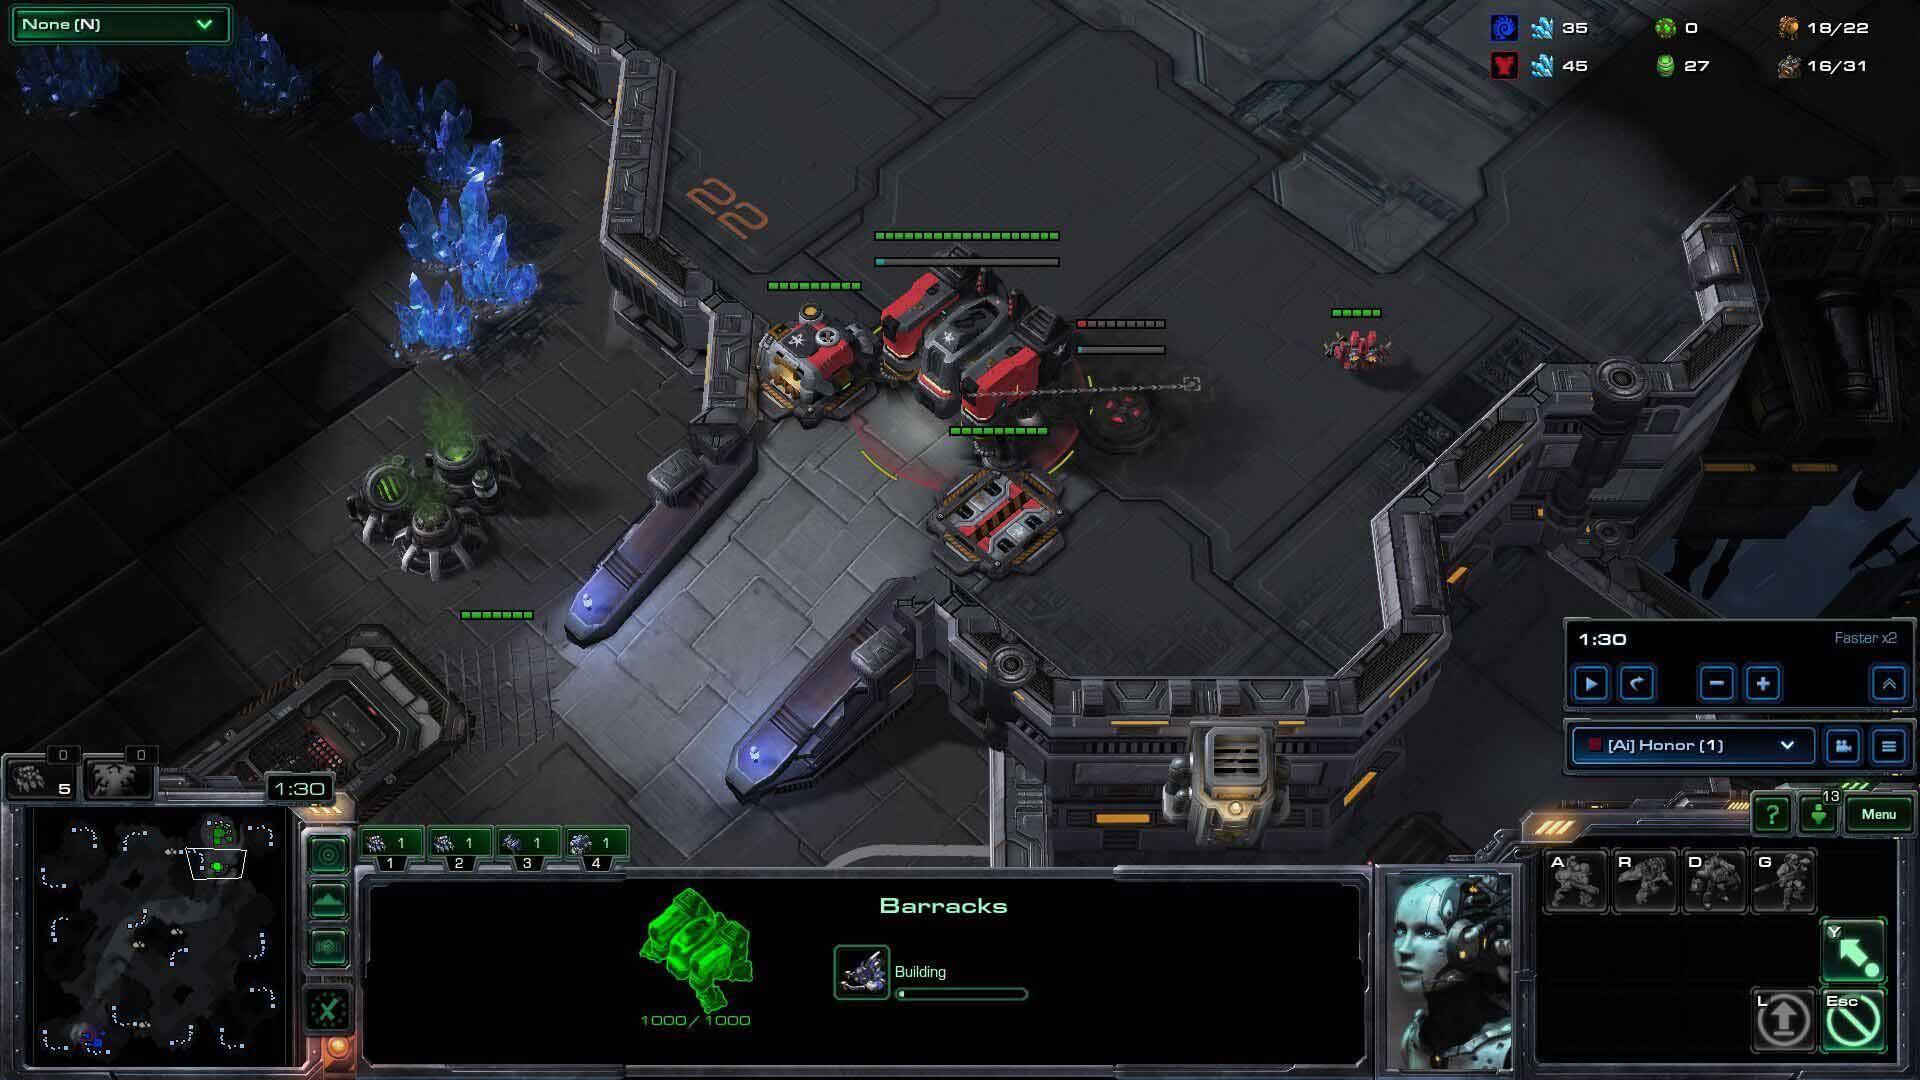 How to play as Terrans in Starcraft 2?